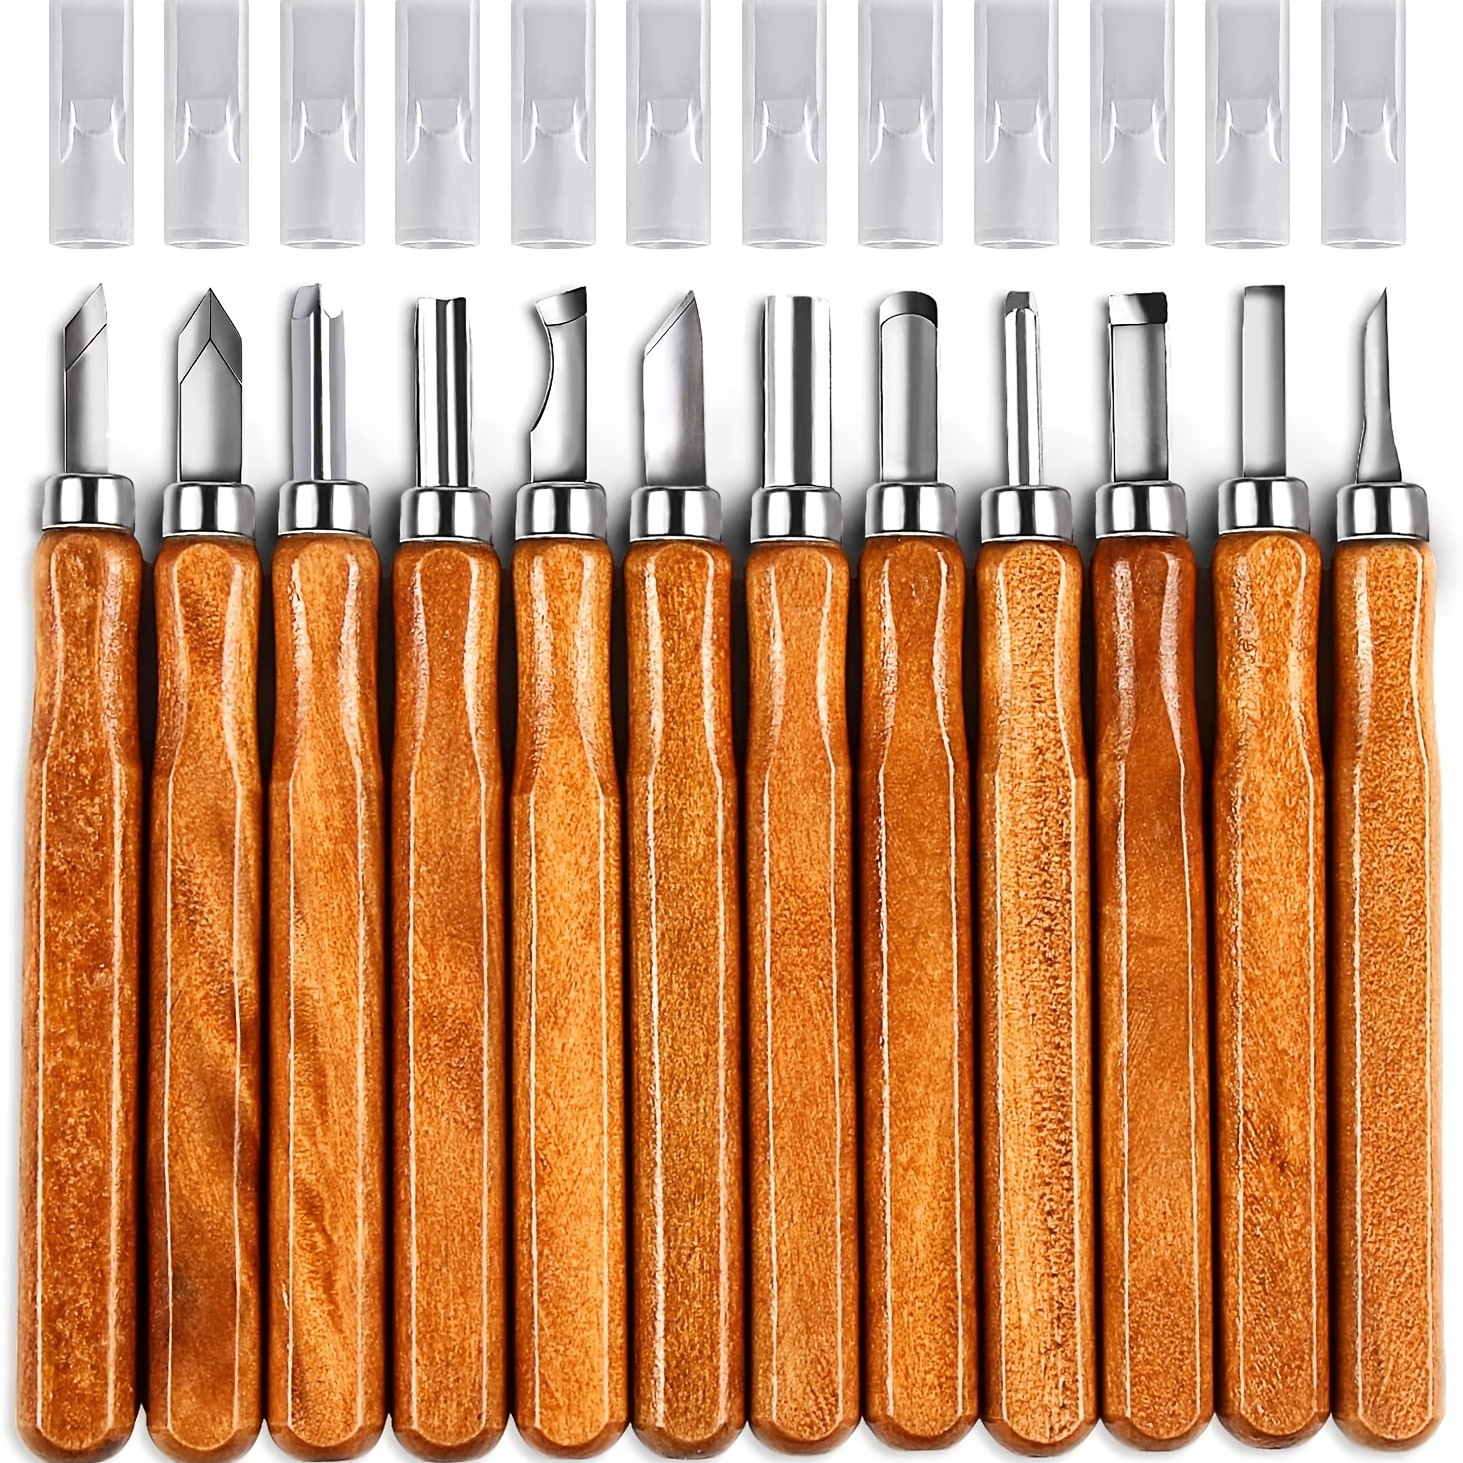 Lino Block Cutting Rubber Stamp Carving Tools With 5 Blade Wood Handle  Printmaking Carving Tools Set - AliExpress